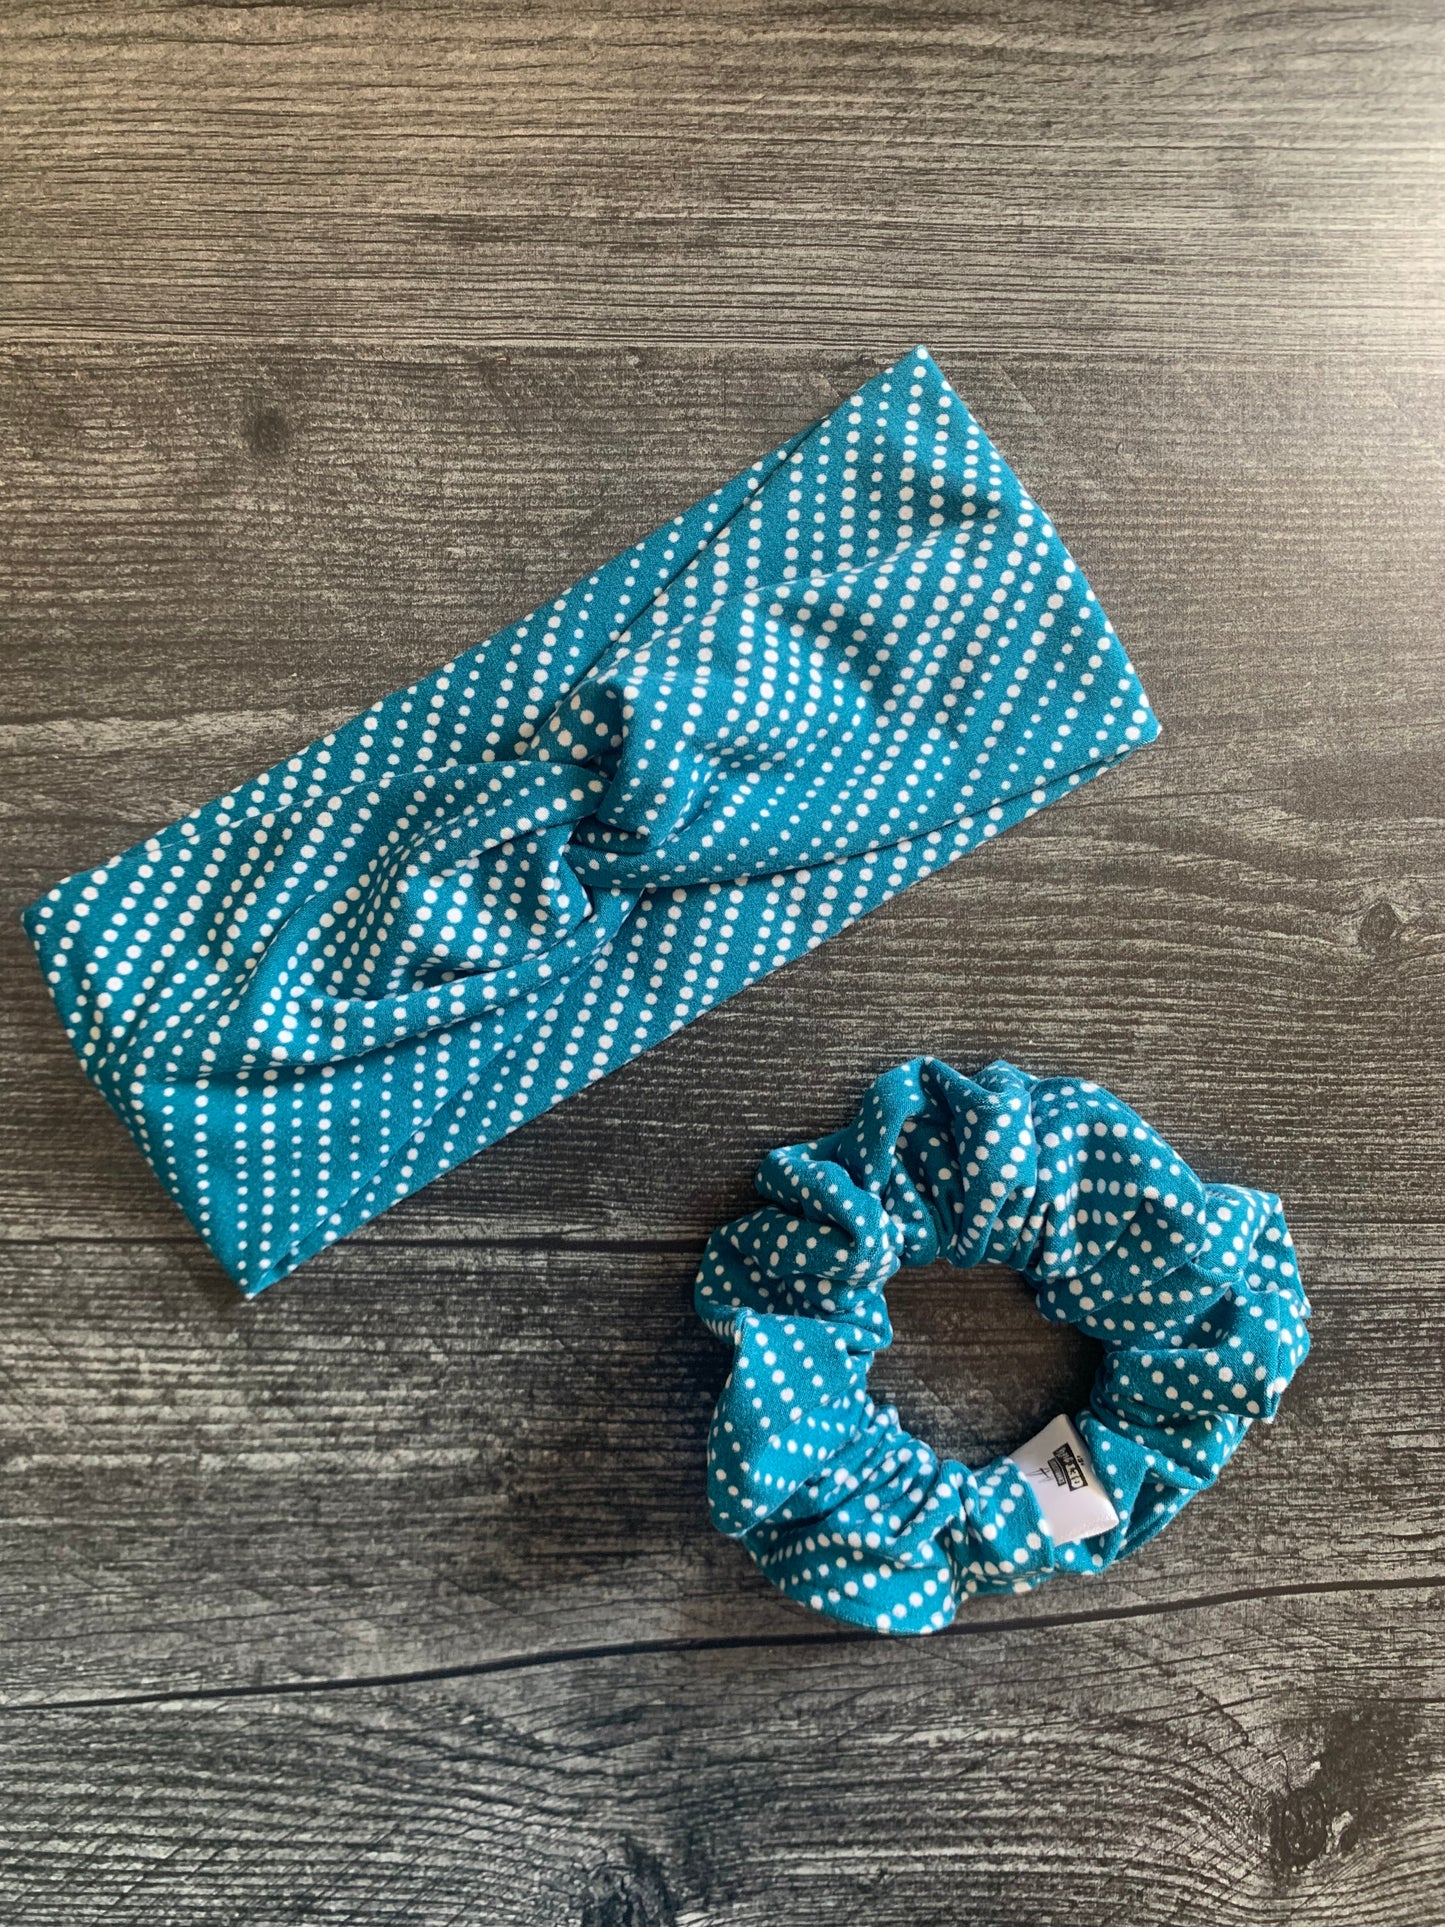 Blue with White Dots - Twisted Knit Headbands